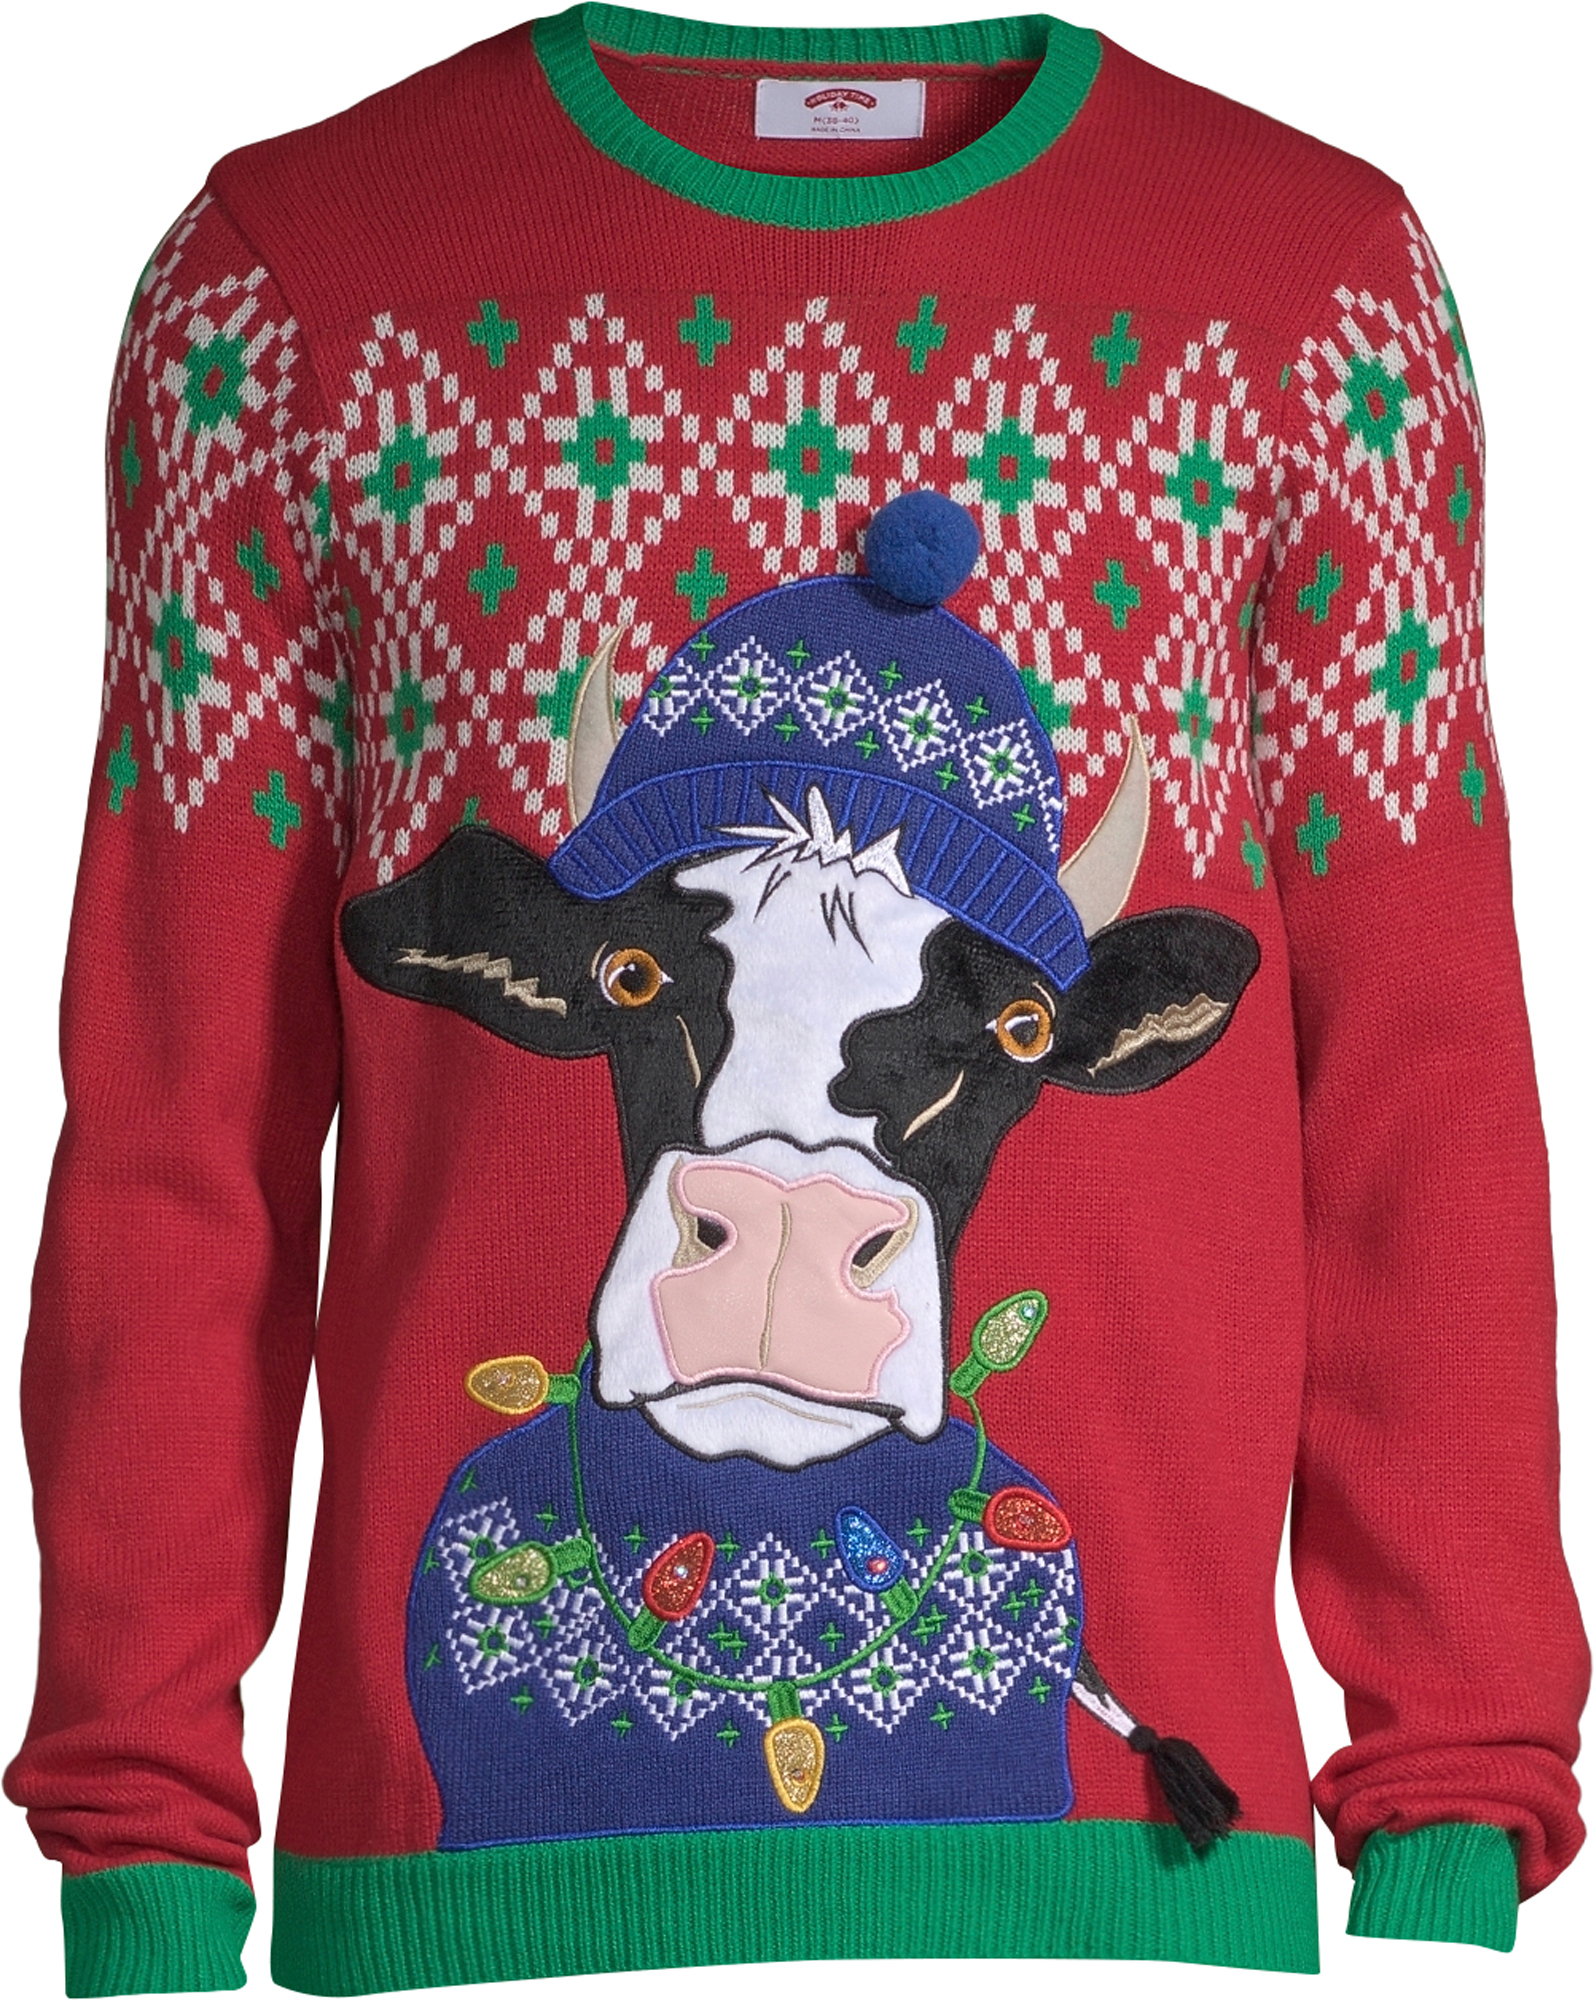 Holiday Time Men's Light-Up Cow Ugly Christmas Sweater - image 2 of 6